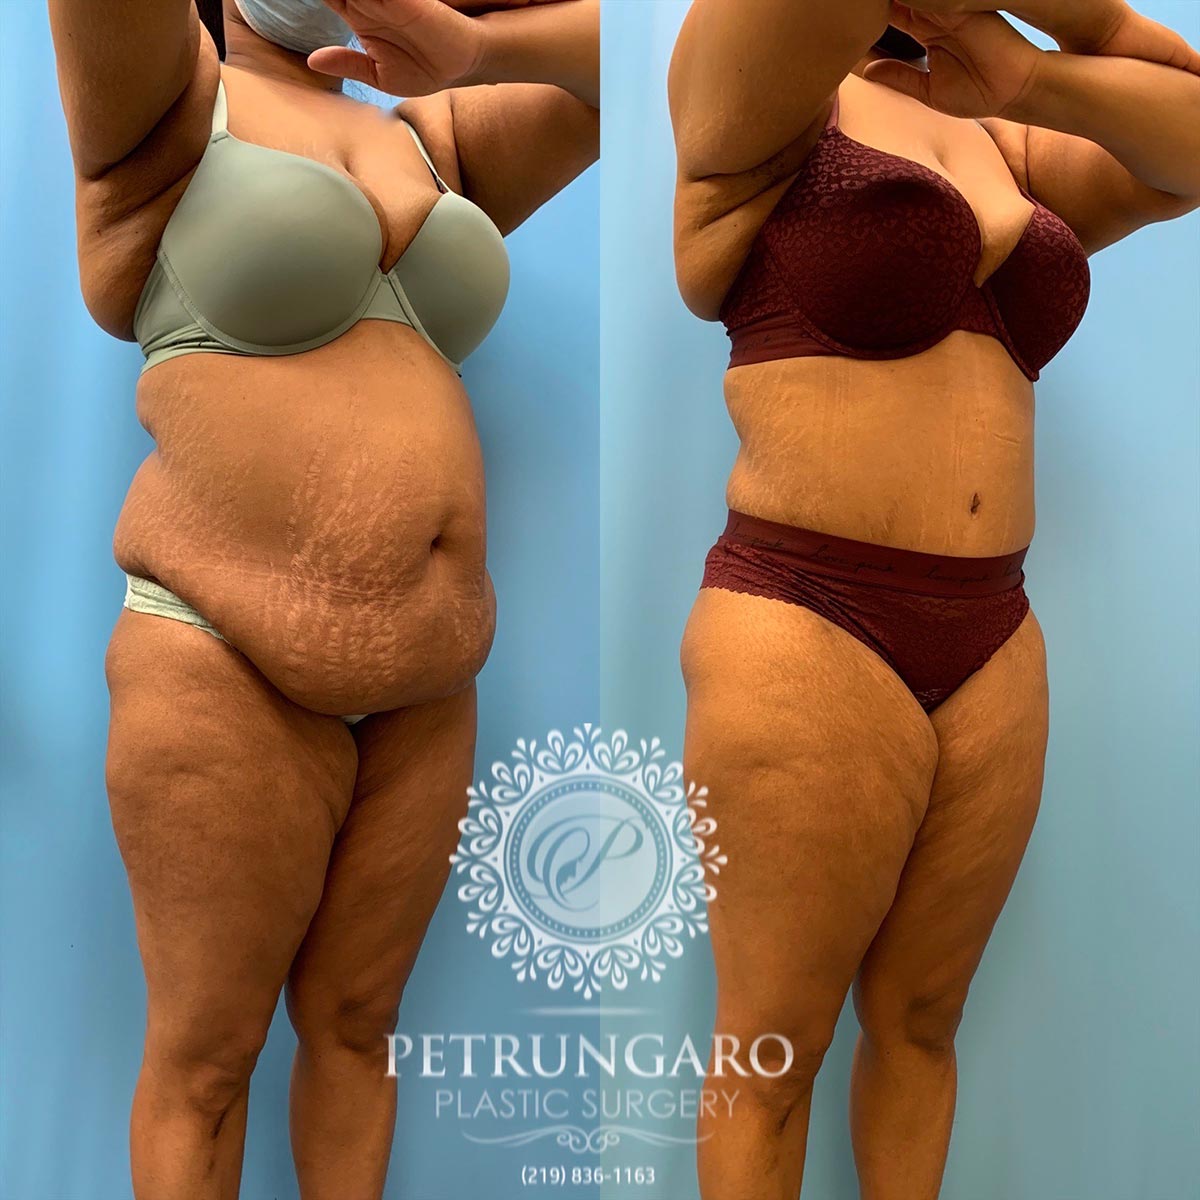 37 year old woman 3 months after tummy tuck with Lipo 360-4